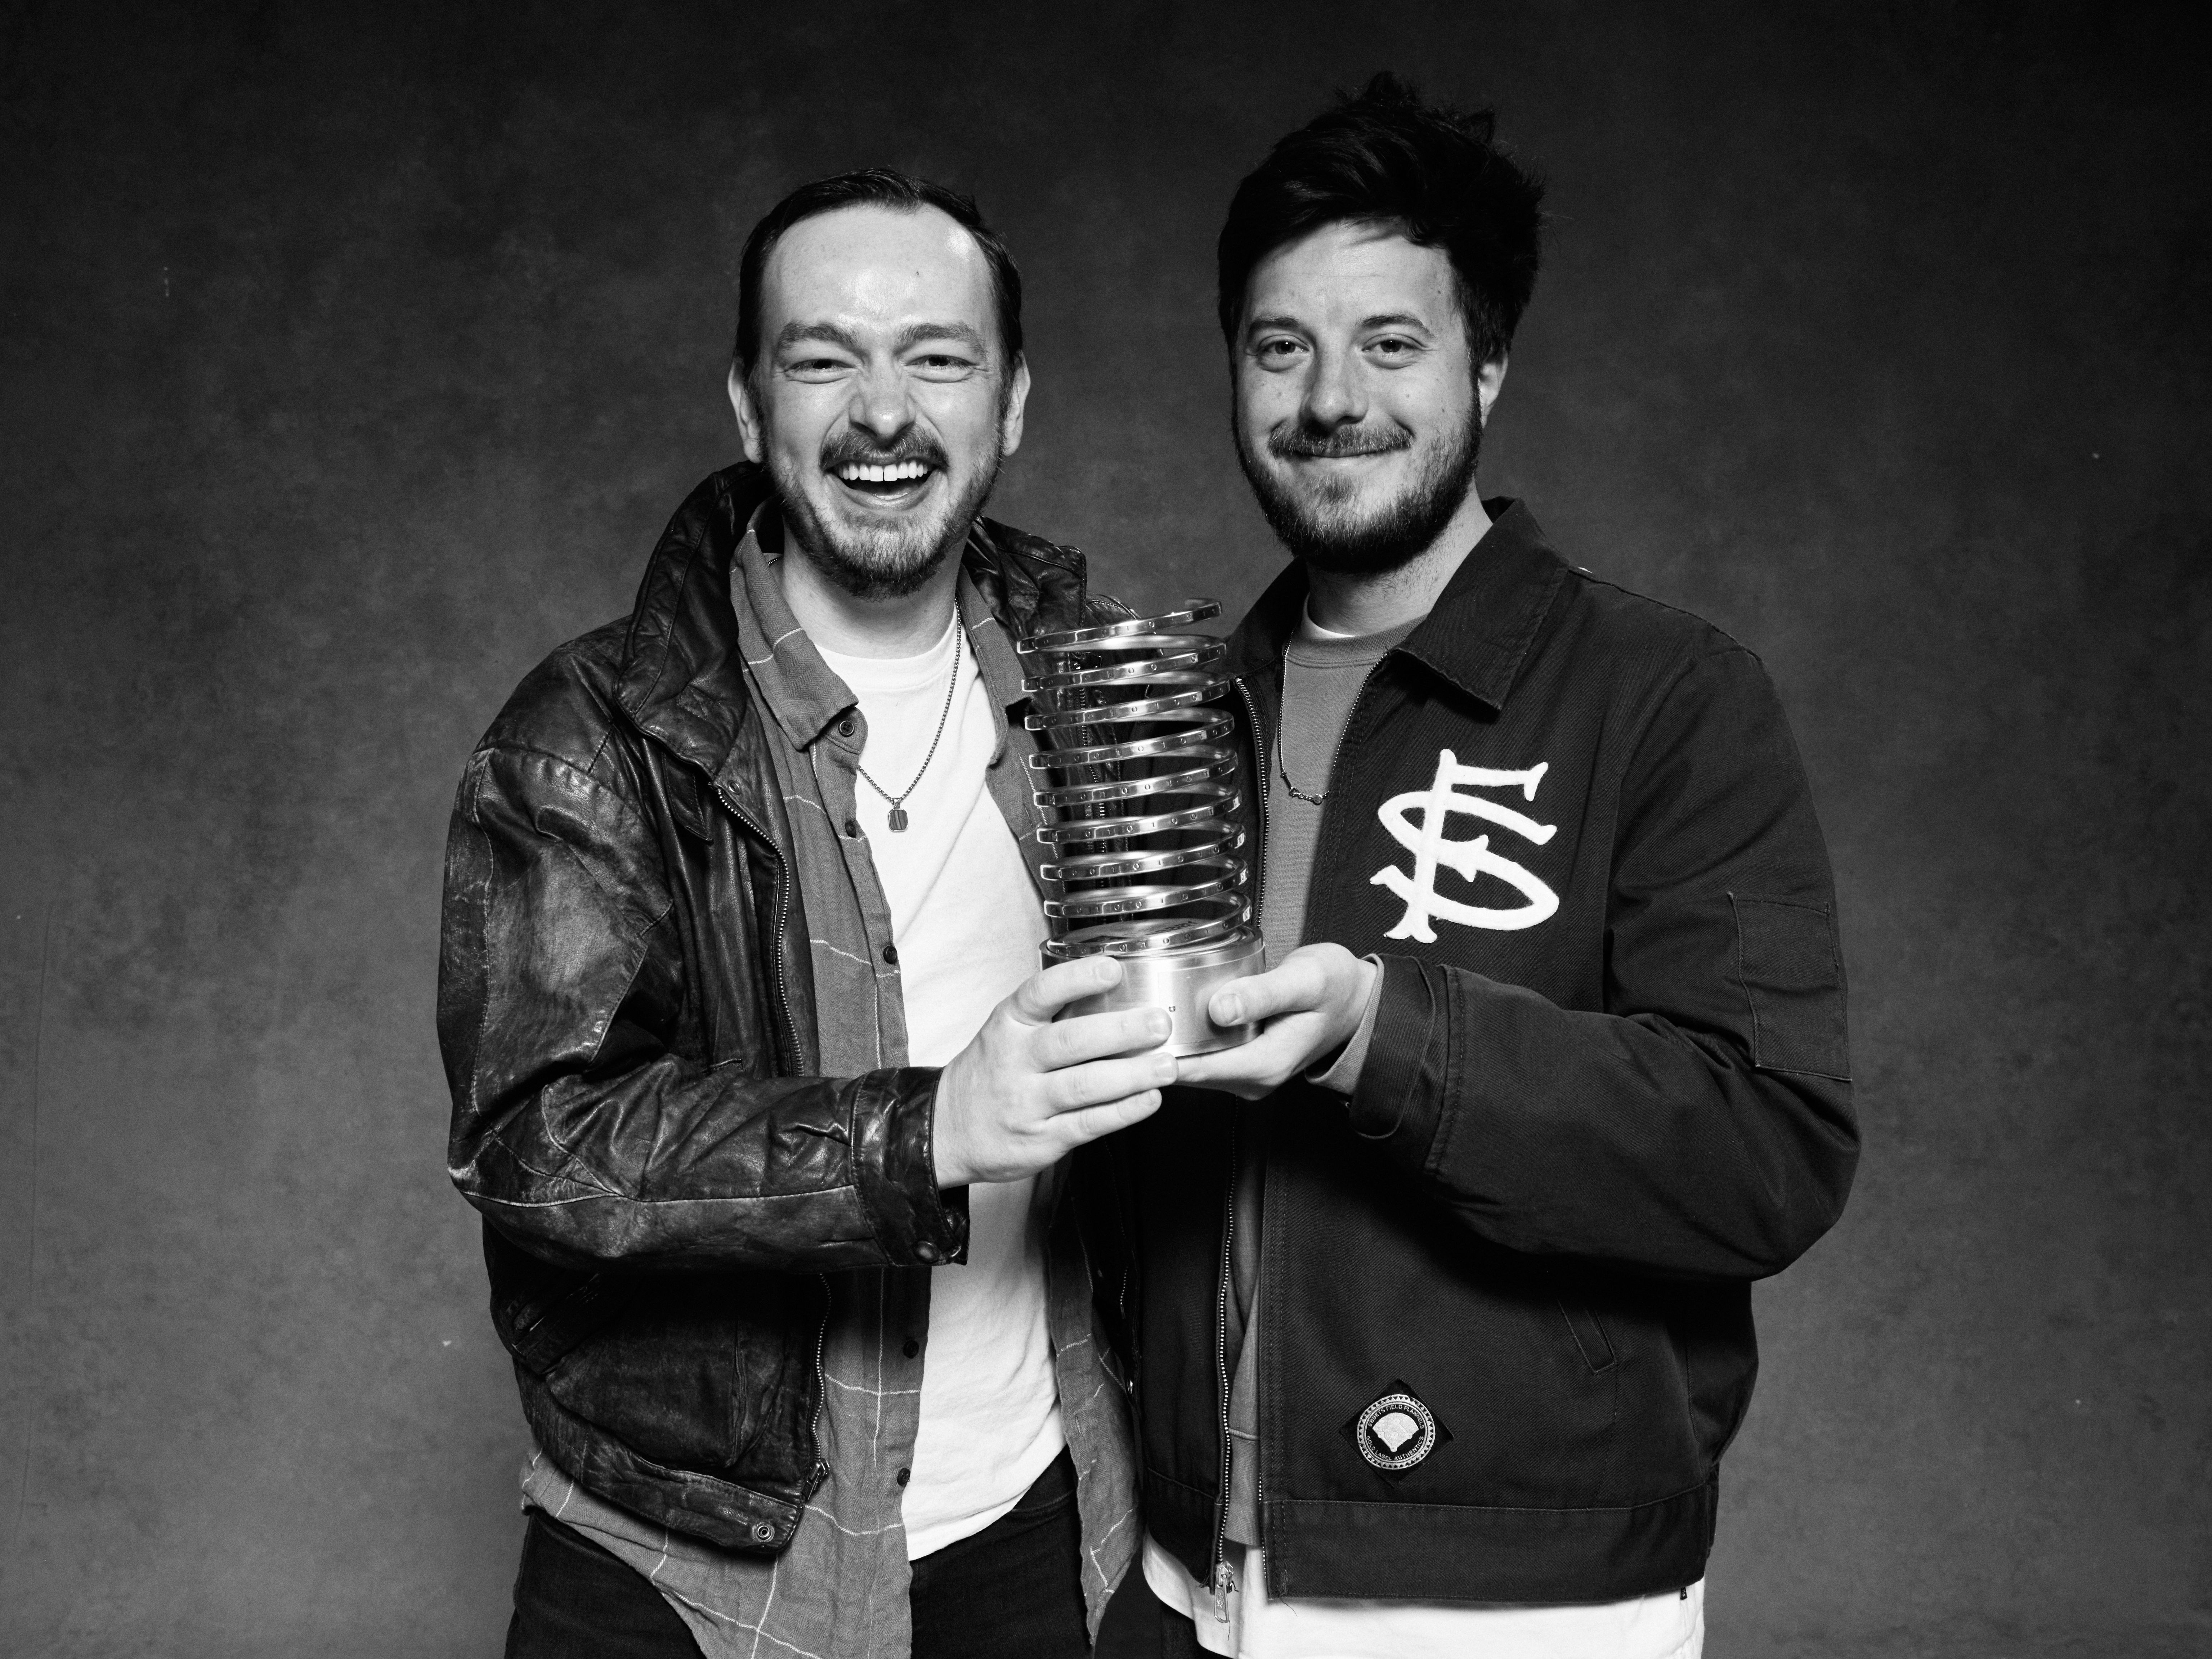 Trey, Domaine's VP Creative and Joel, Sr Designer at Domaine are holding a Webby Award in this black and white photograph.